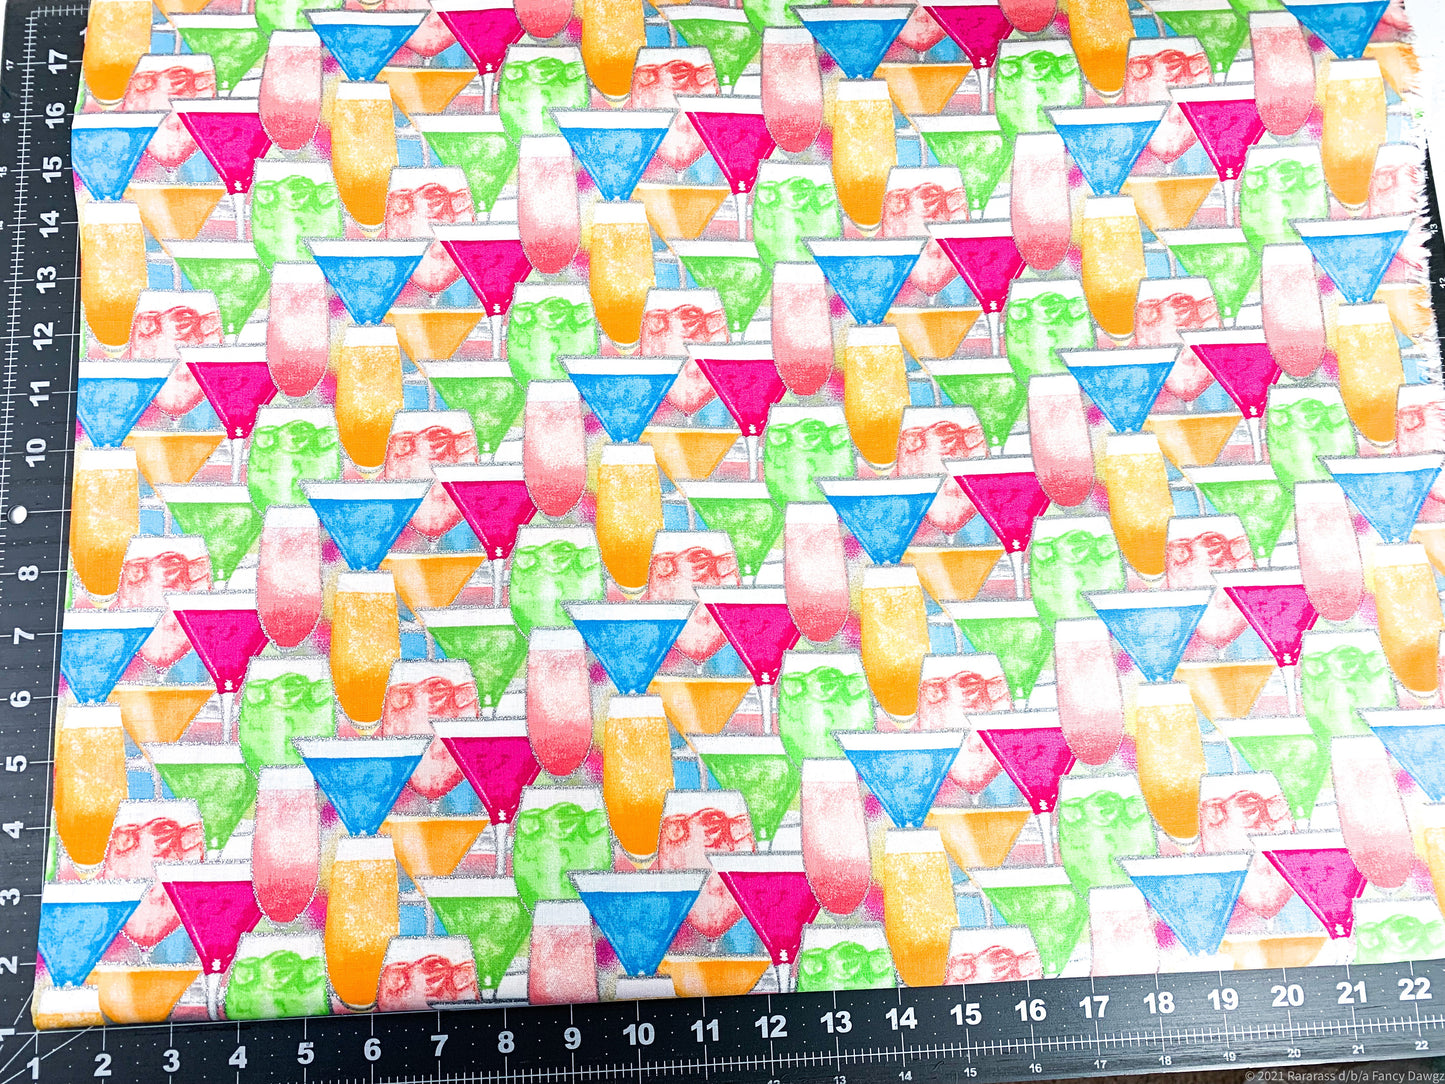 Mixology Mixed drink fabric 18019 cosmos cocktail fabric